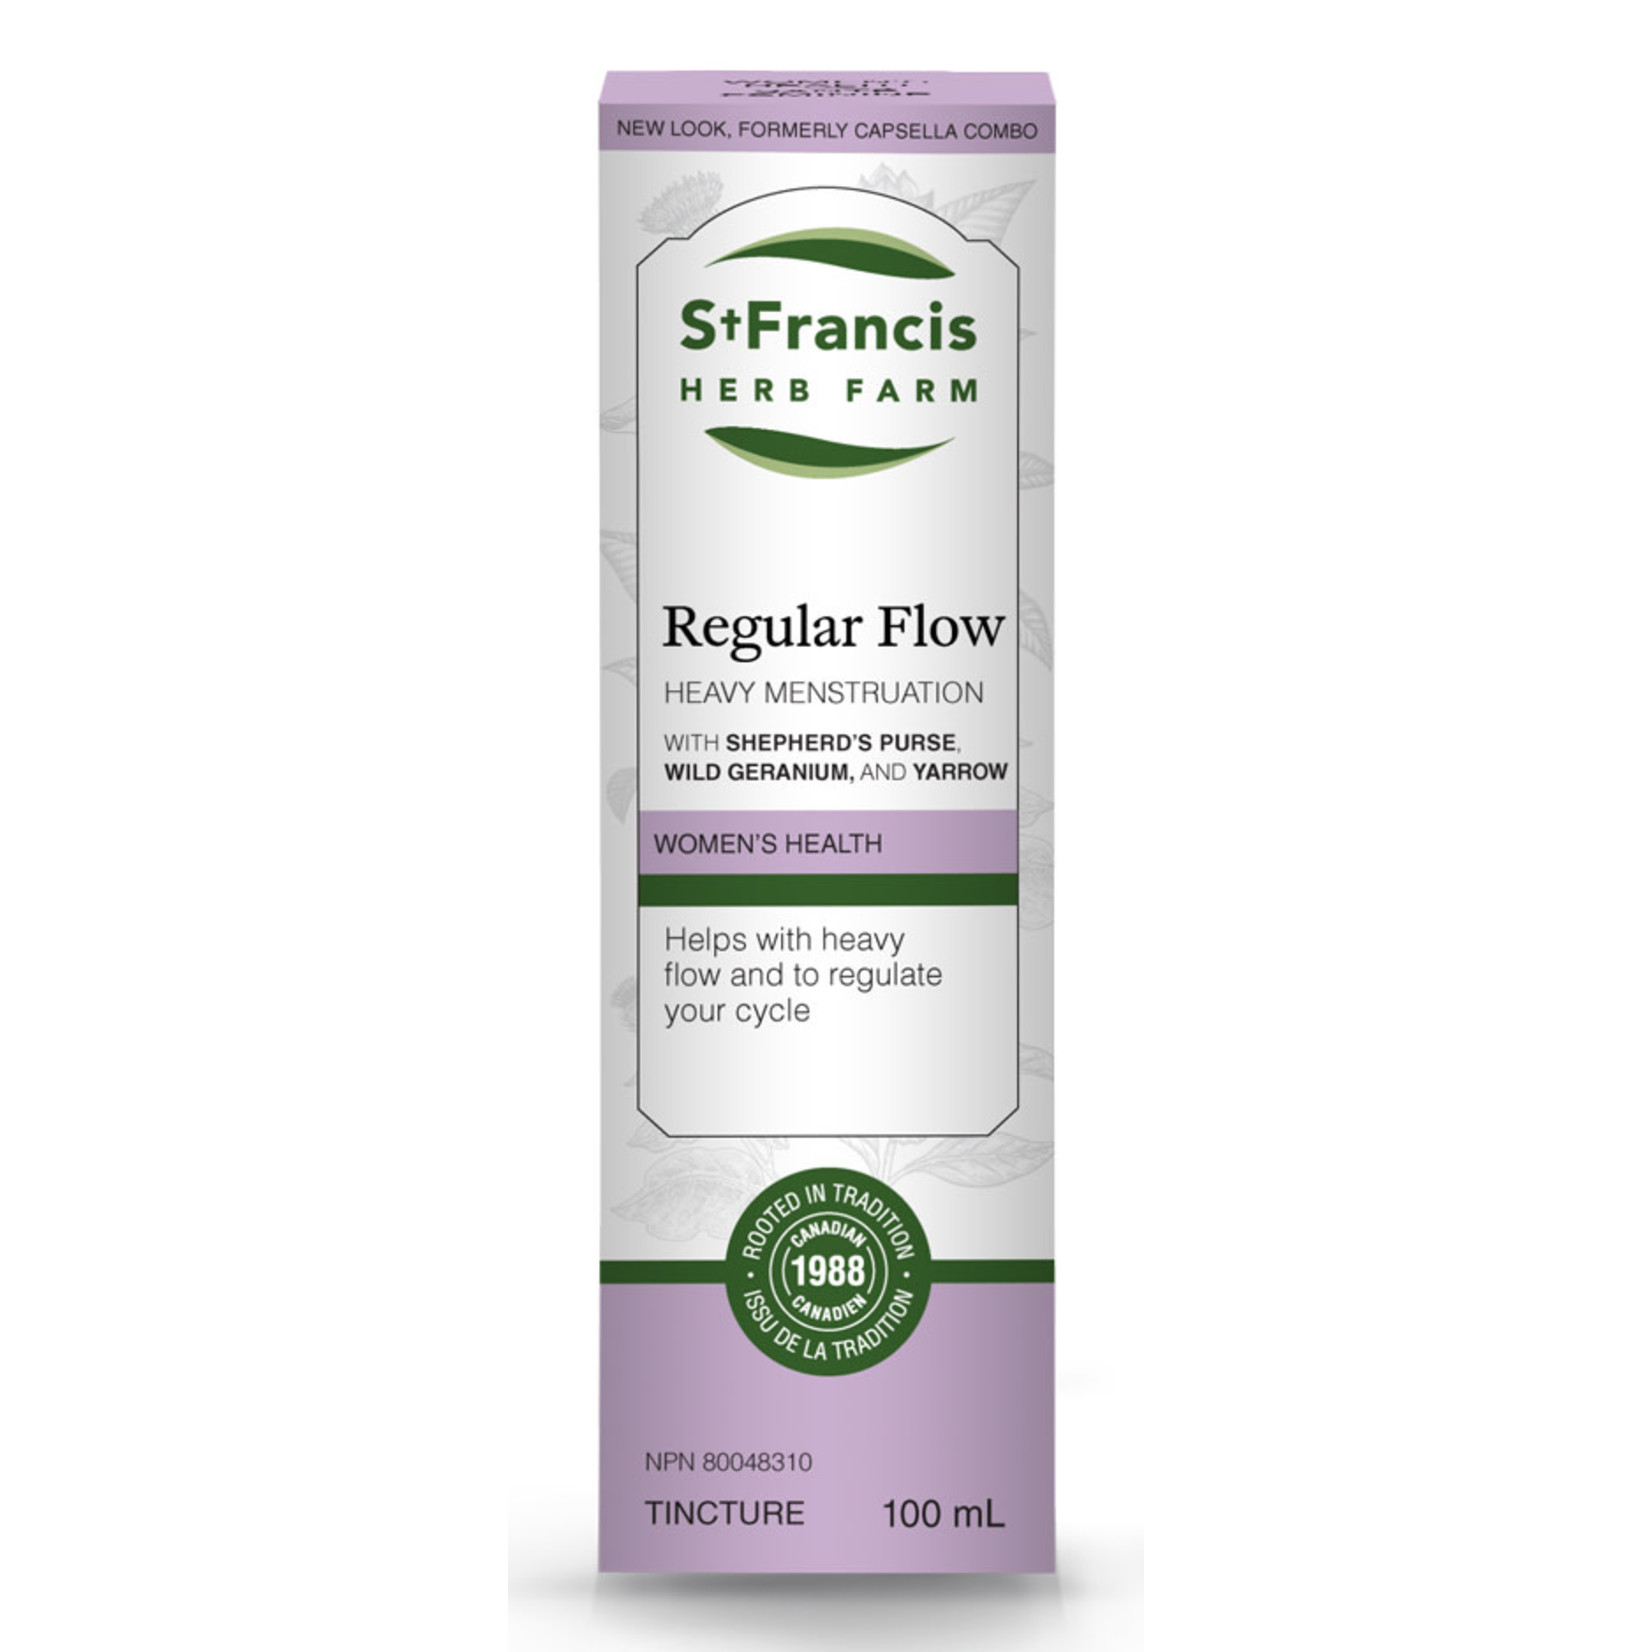 ST FRANCIS ST FRANCIS FEMANCE REGULAR FLOW TINCTURE (CAPSELLA COMBO OR EXCESS) 50ML